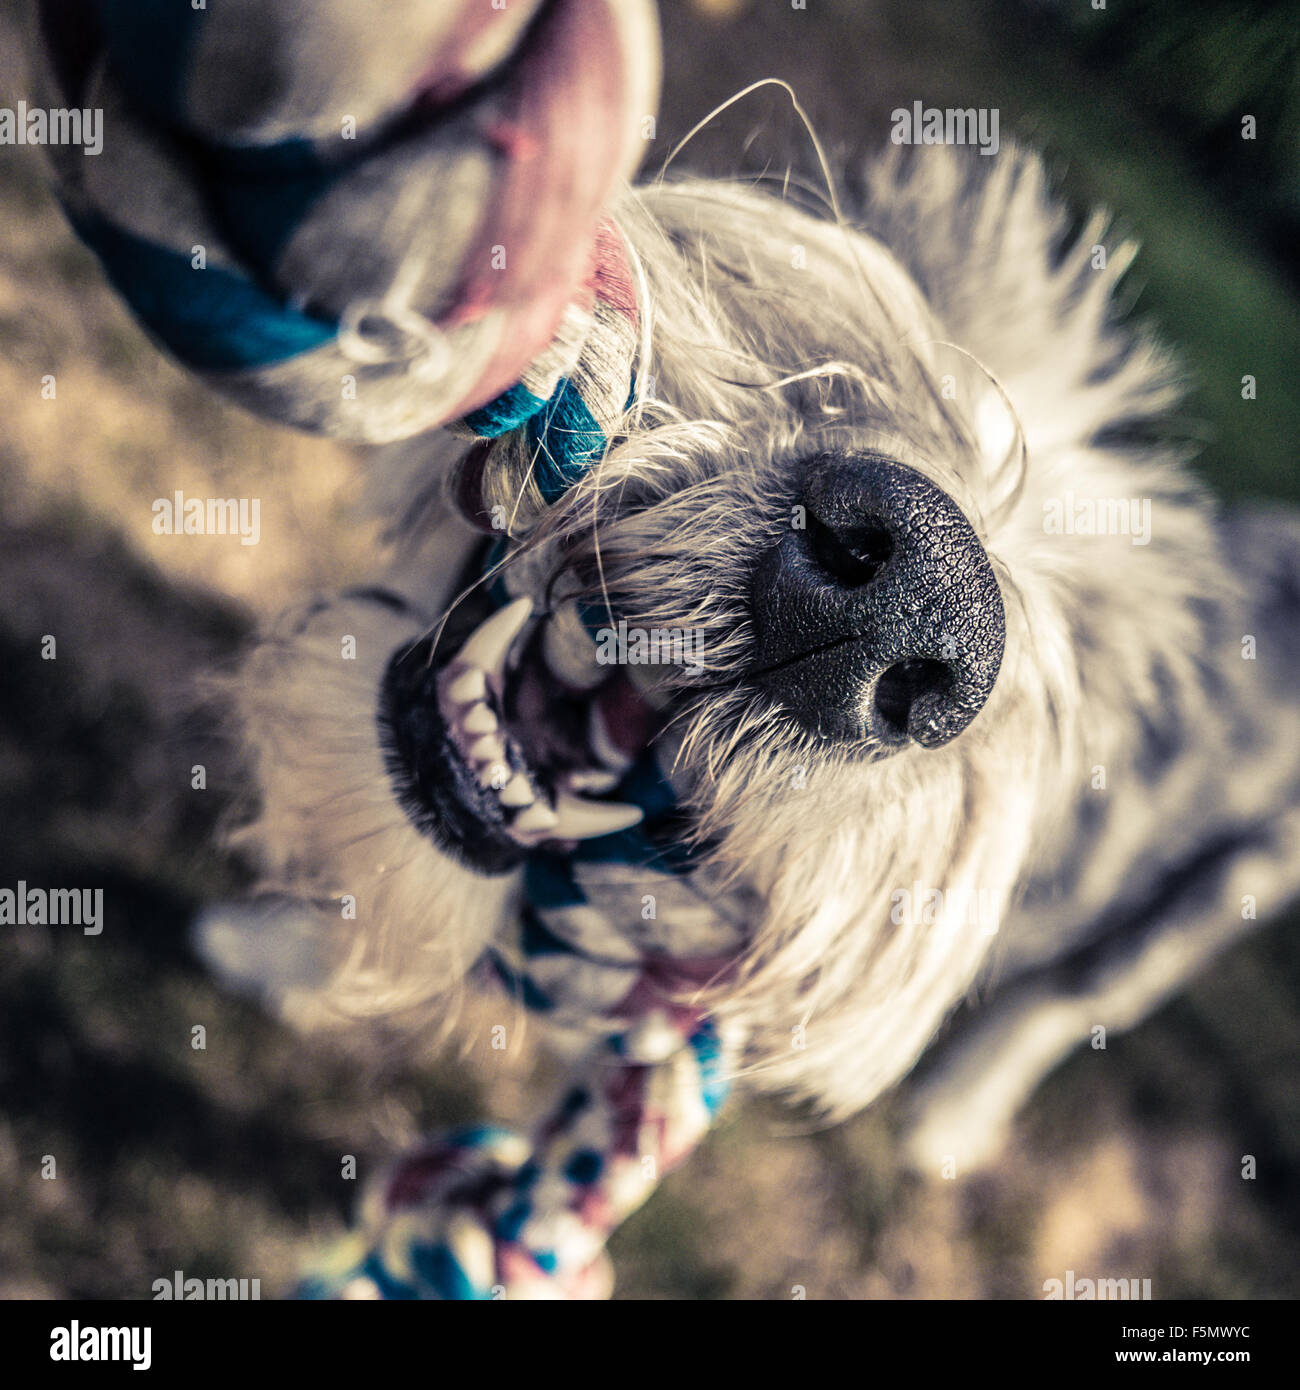 Closeup Of Teeth And Nose Of An Old English Sheepdog Playing Tug-Of-War Stock Photo